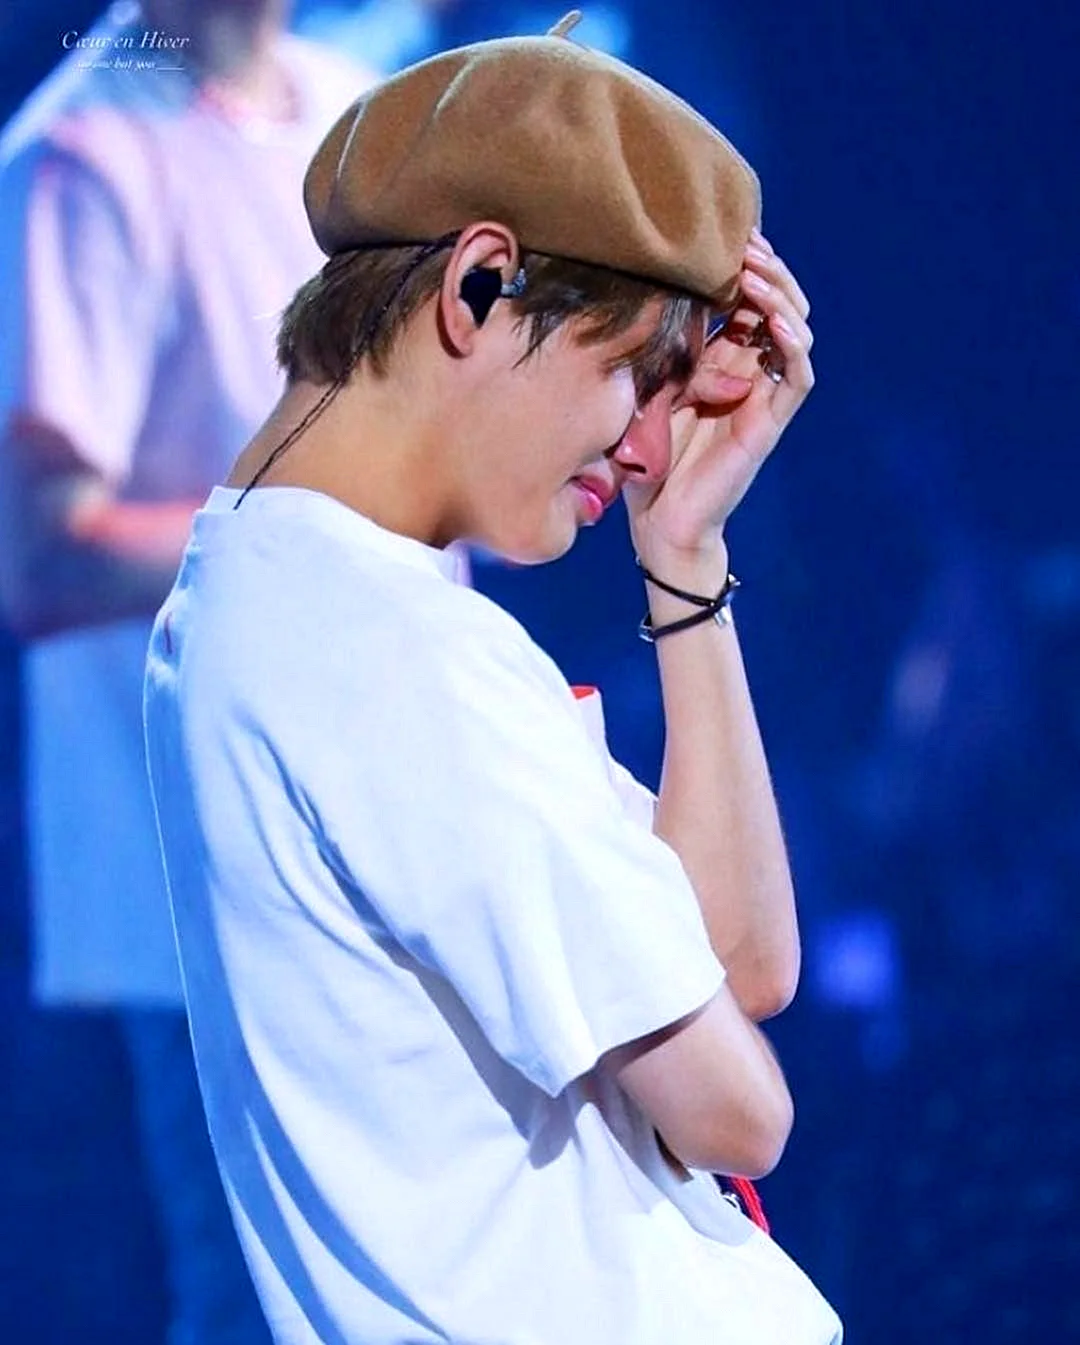 Bts Taehyung Cry Wallpaper For iPhone